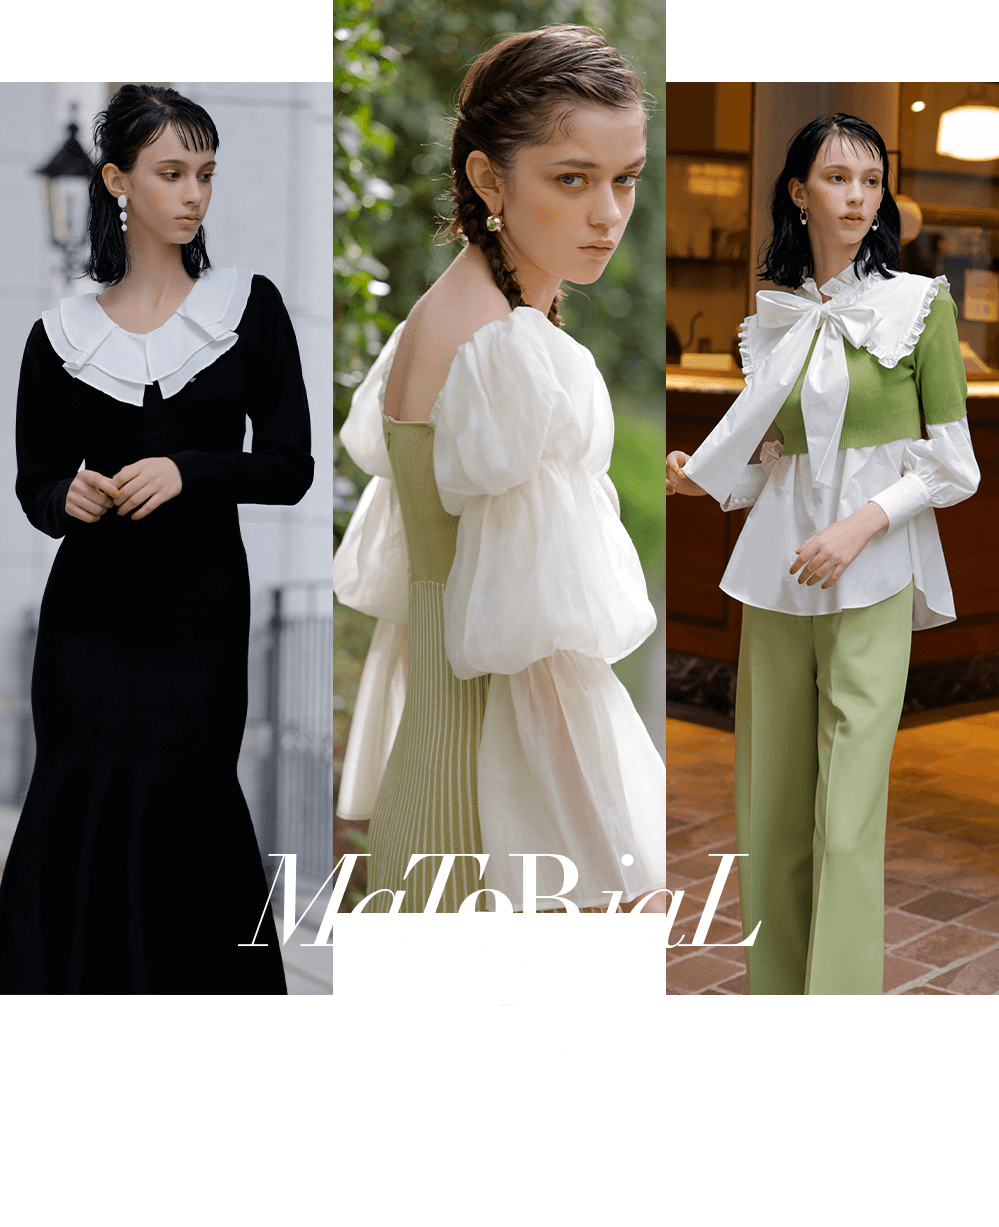 Material mix items 2023 Spring Collection